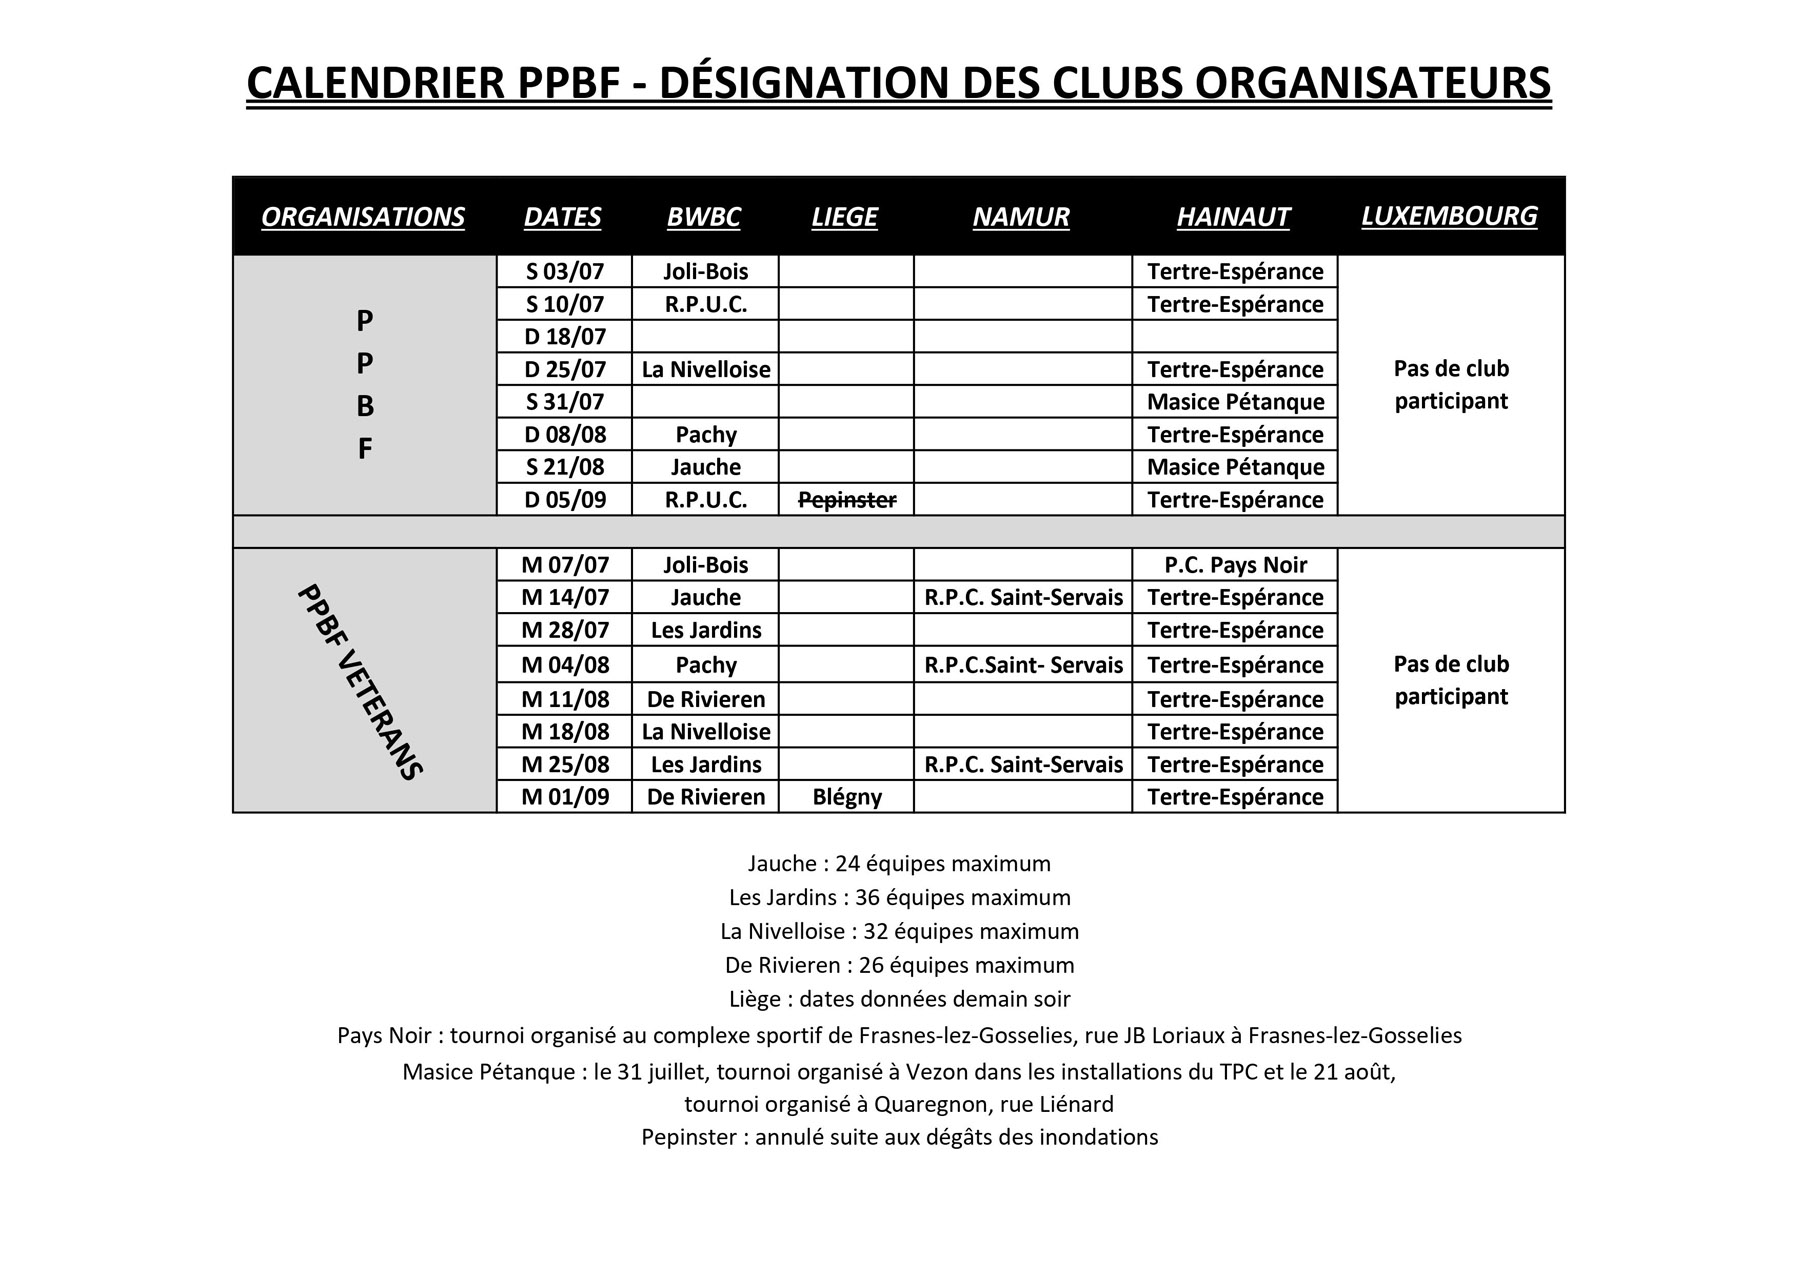 2021 Calendrier PPBF